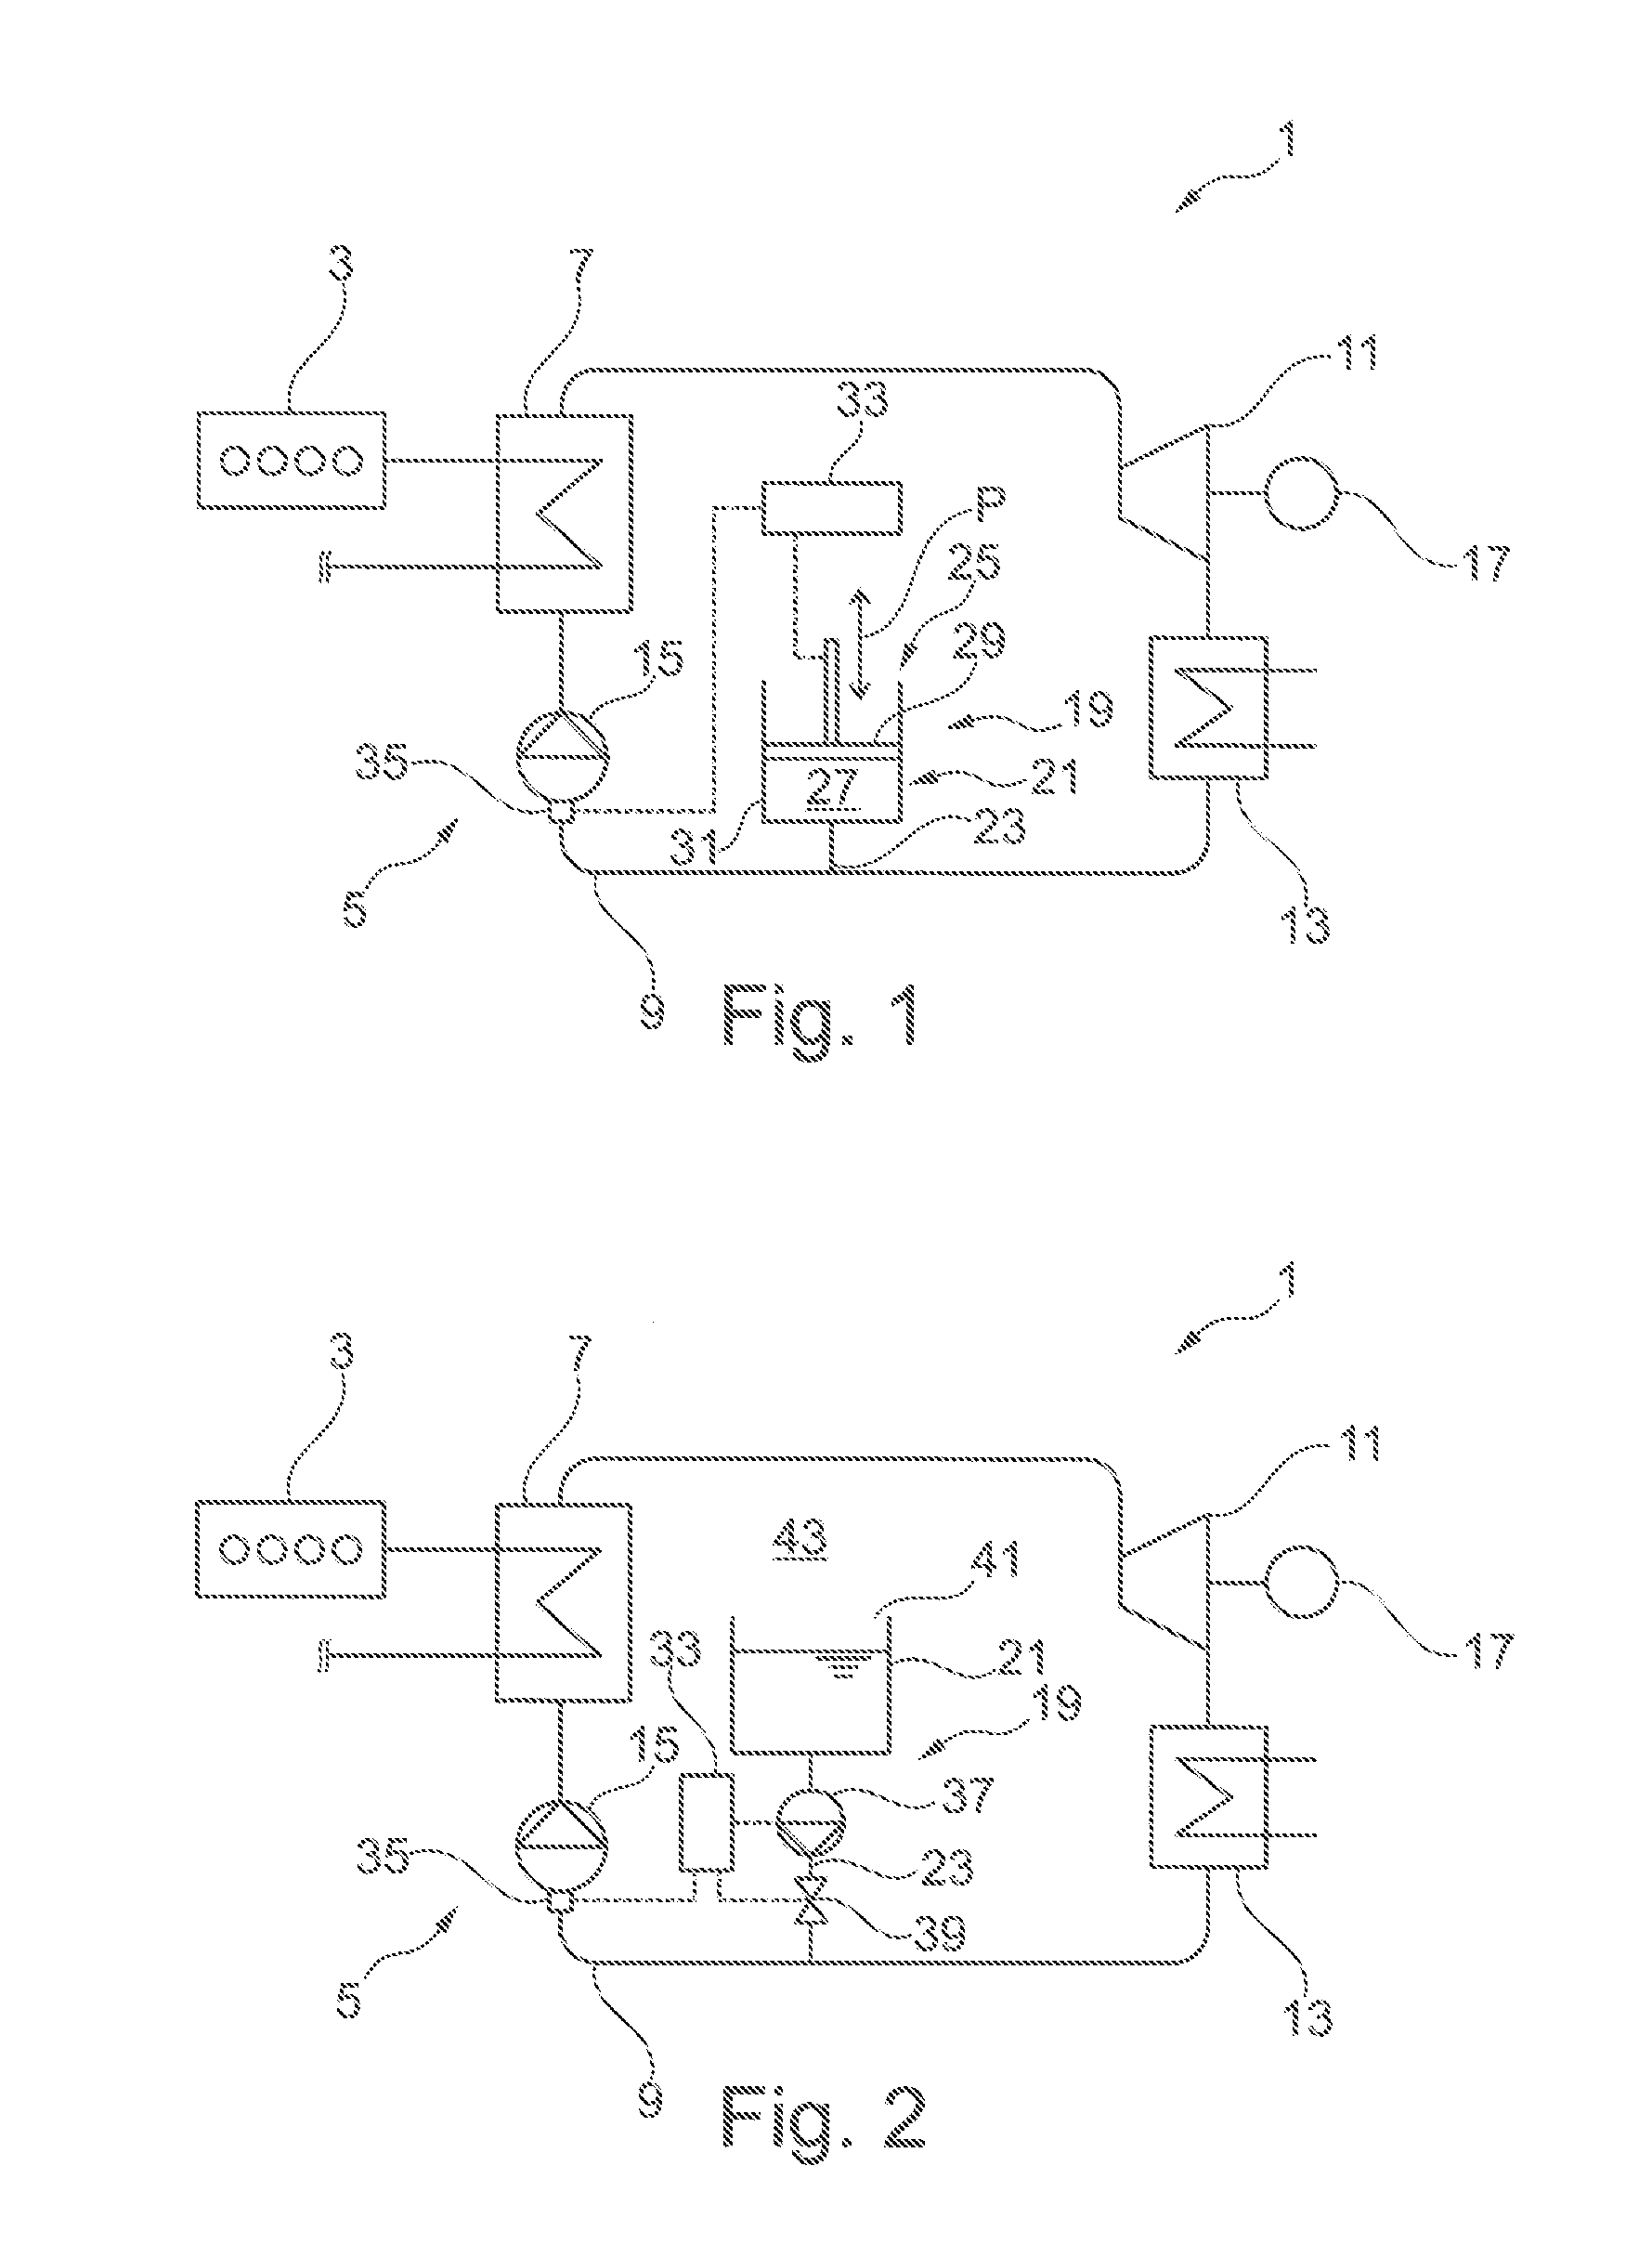 System for a thermodynamic cycle, control unit for a system for a thermodynamic cycle, method for operating a system, and arrangement with an internal combustion engine and a system